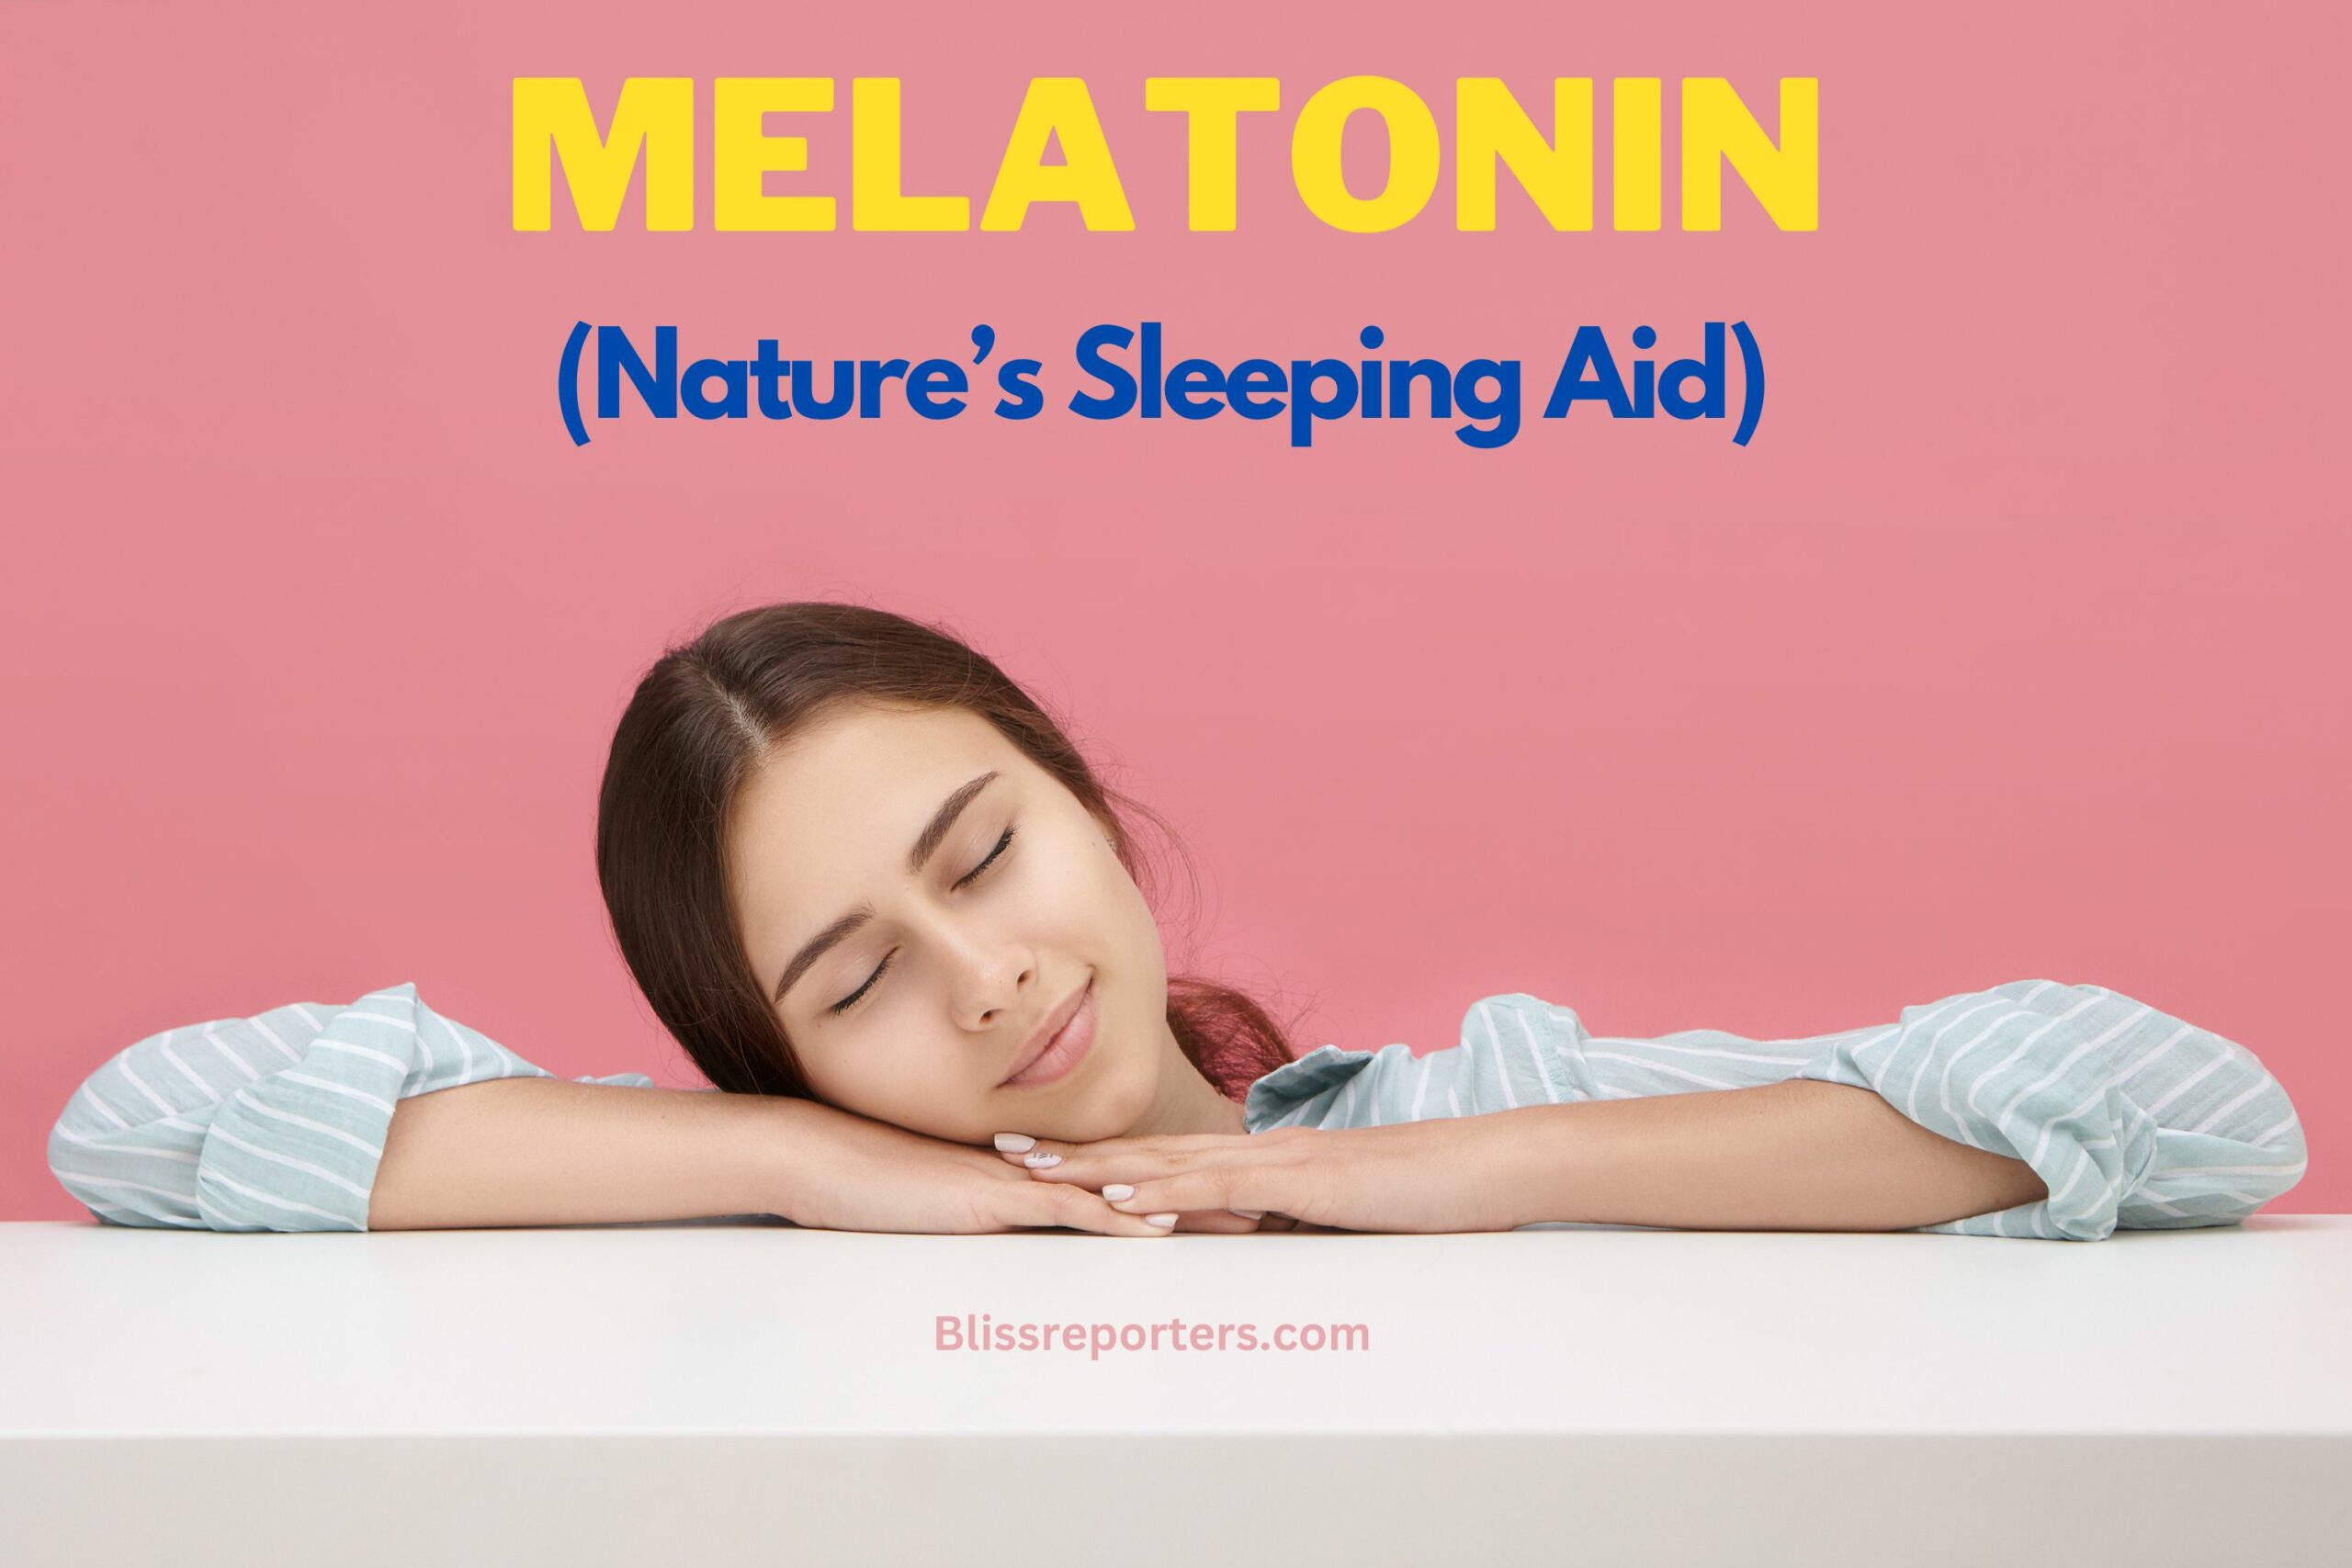 You are currently viewing Melatonin: (Nature’s Sleeping Aid) Benefits, Dosage, and Use